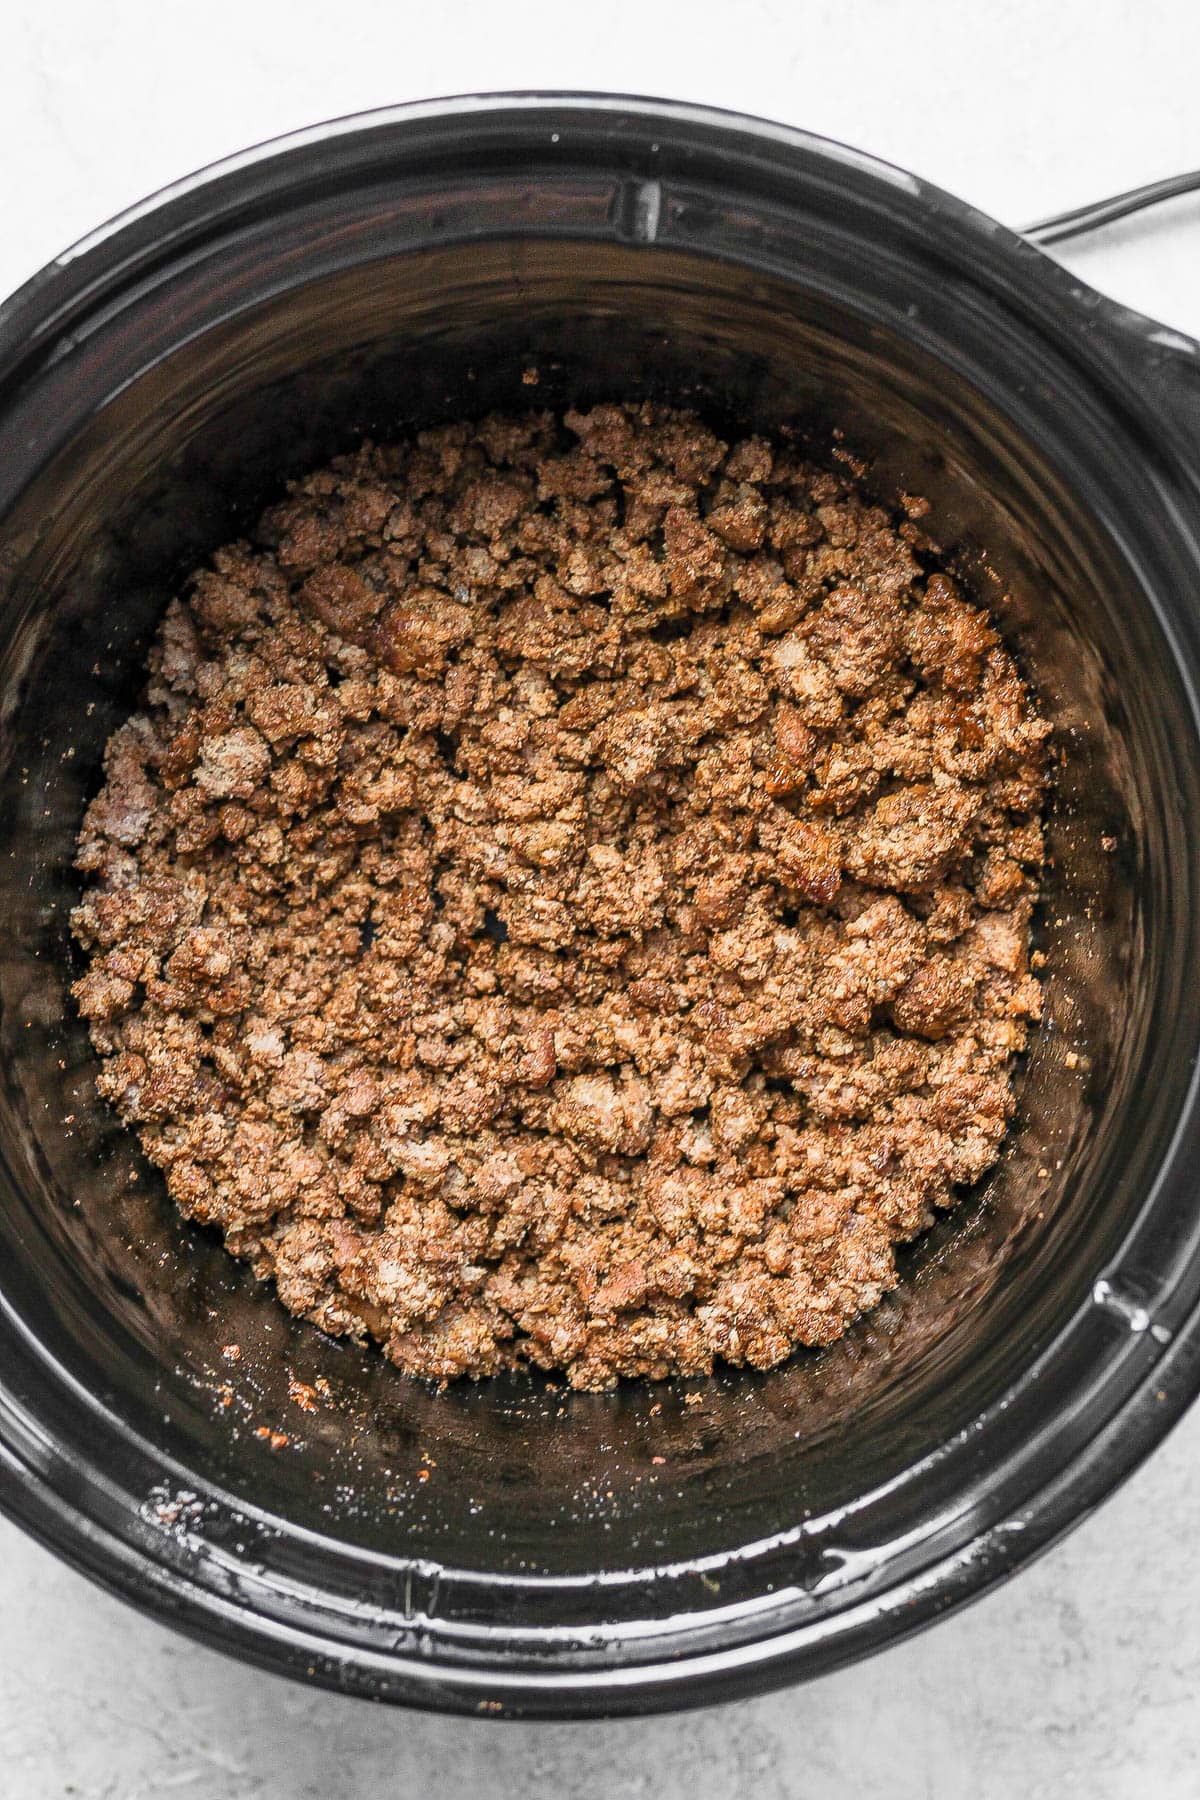 Crockpot with cooked taco meat.